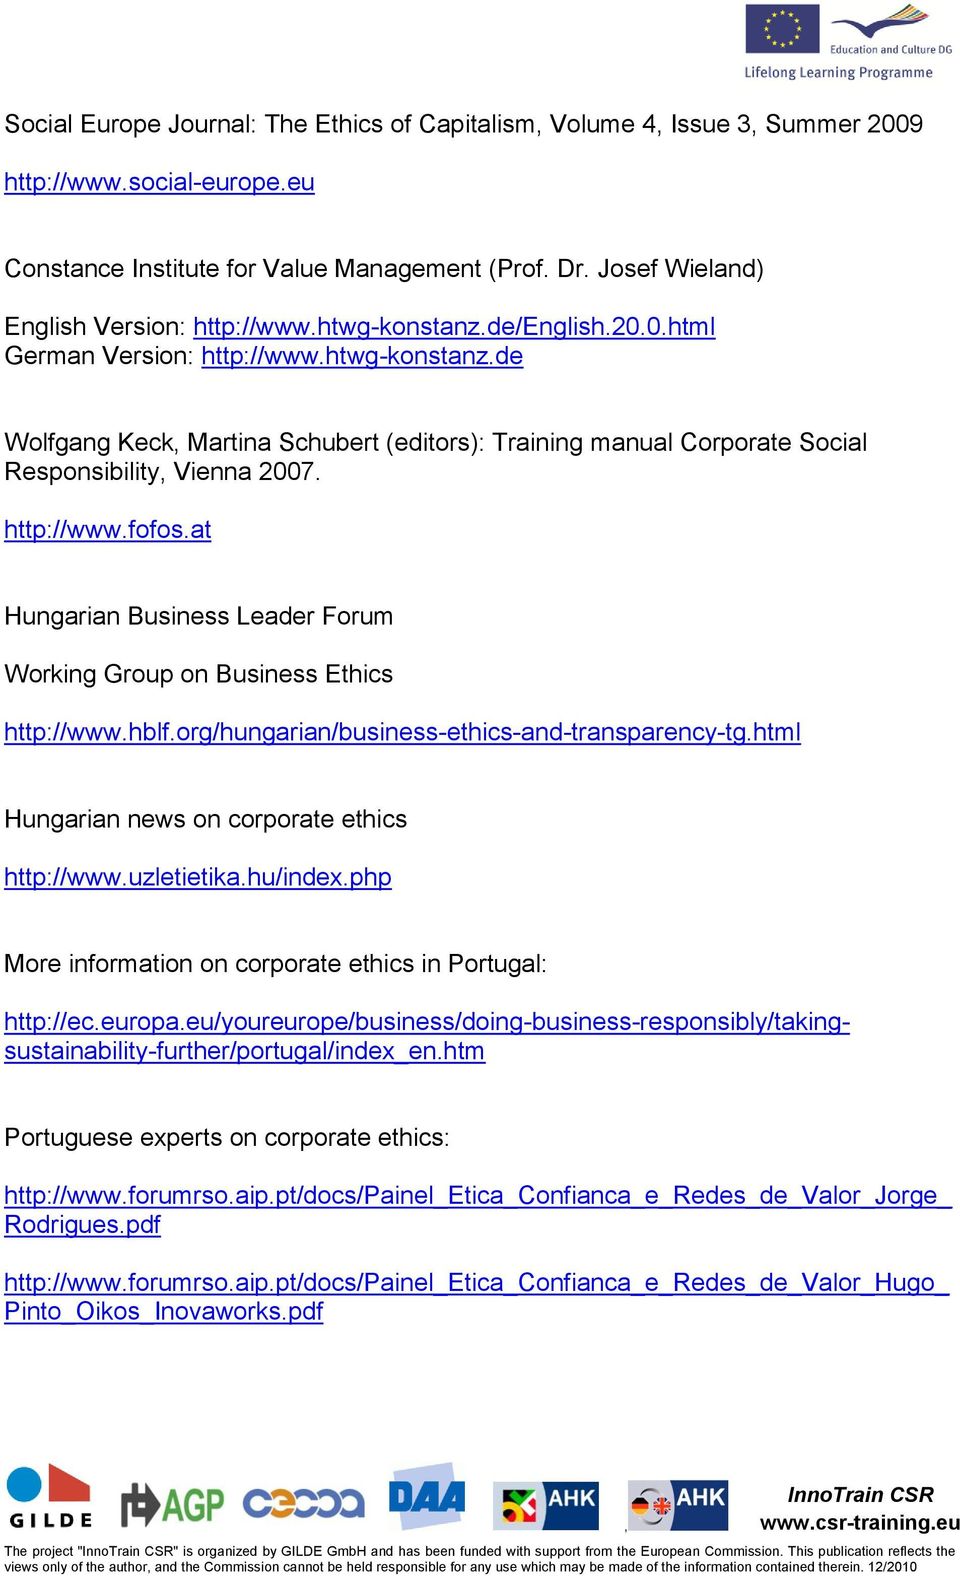 at Hungarian Business Leader Forum Working Group on Business Ethics http://www.hblf.org/hungarian/business-ethics-and-transparency-tg.html Hungarian news on corporate ethics http://www.uzletietika.